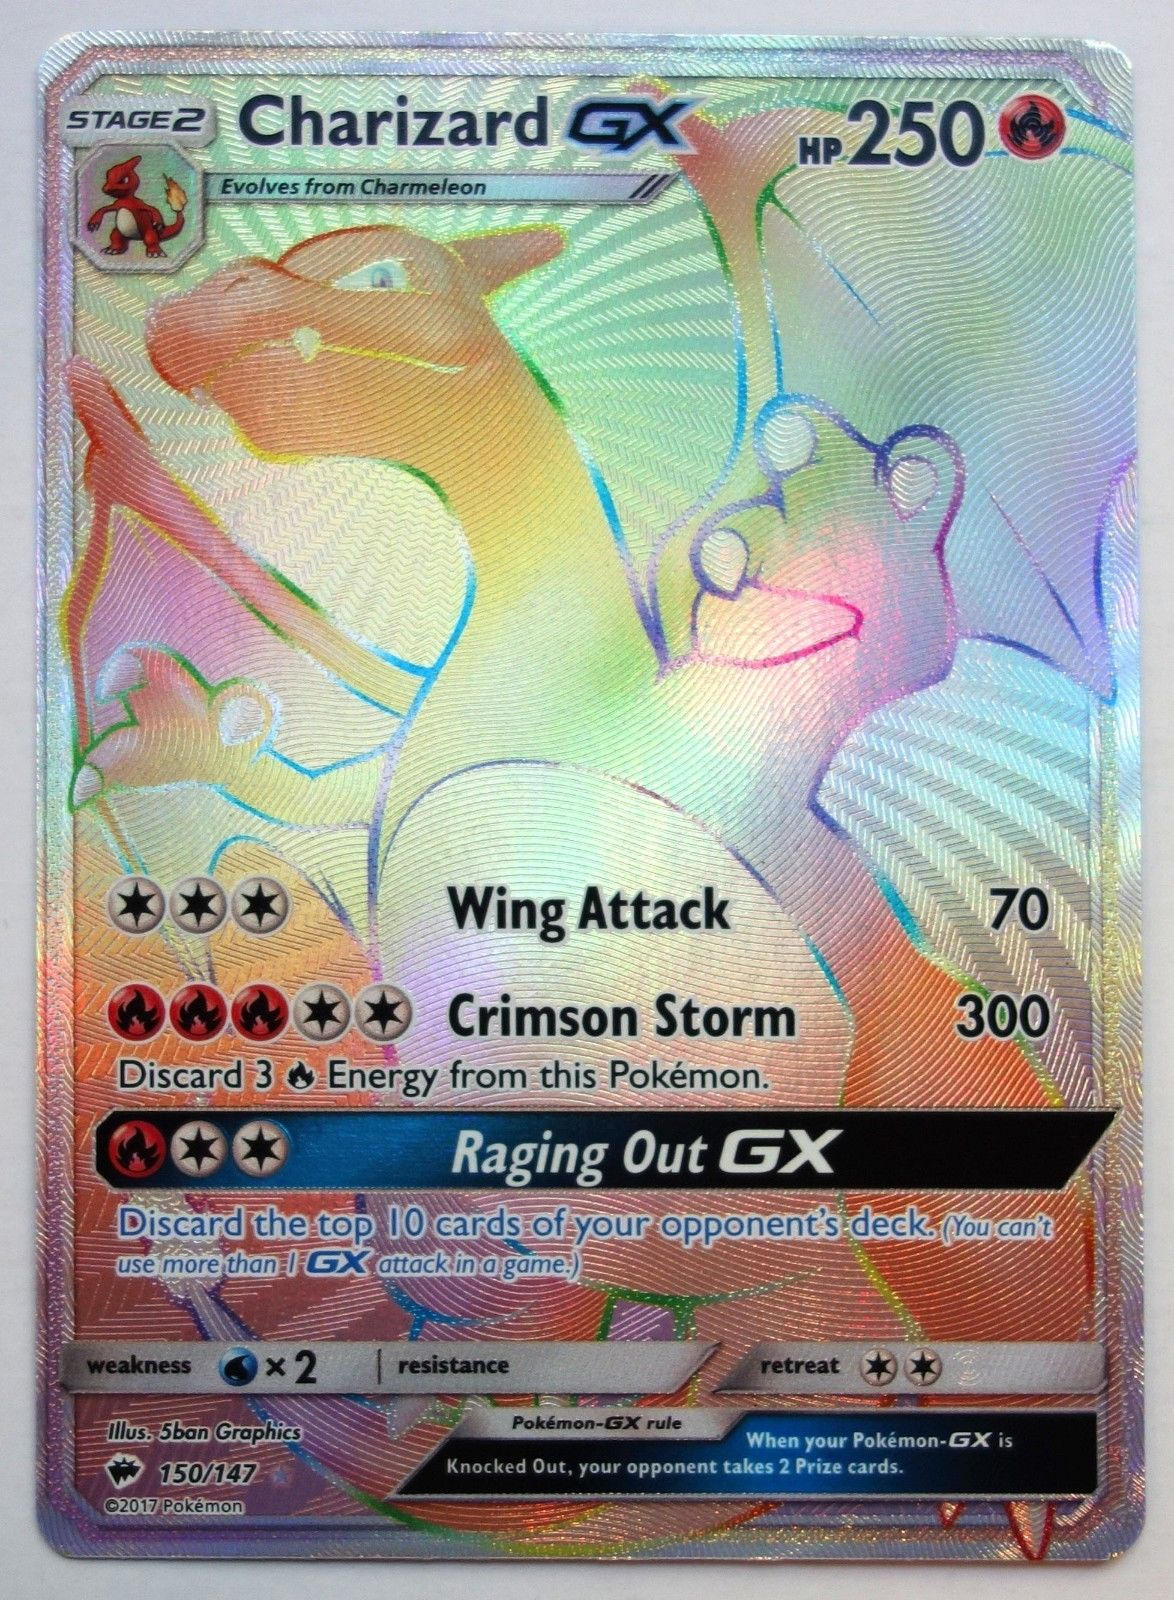 How much is a rainbow rare charizard worth, MISHKANET.COM